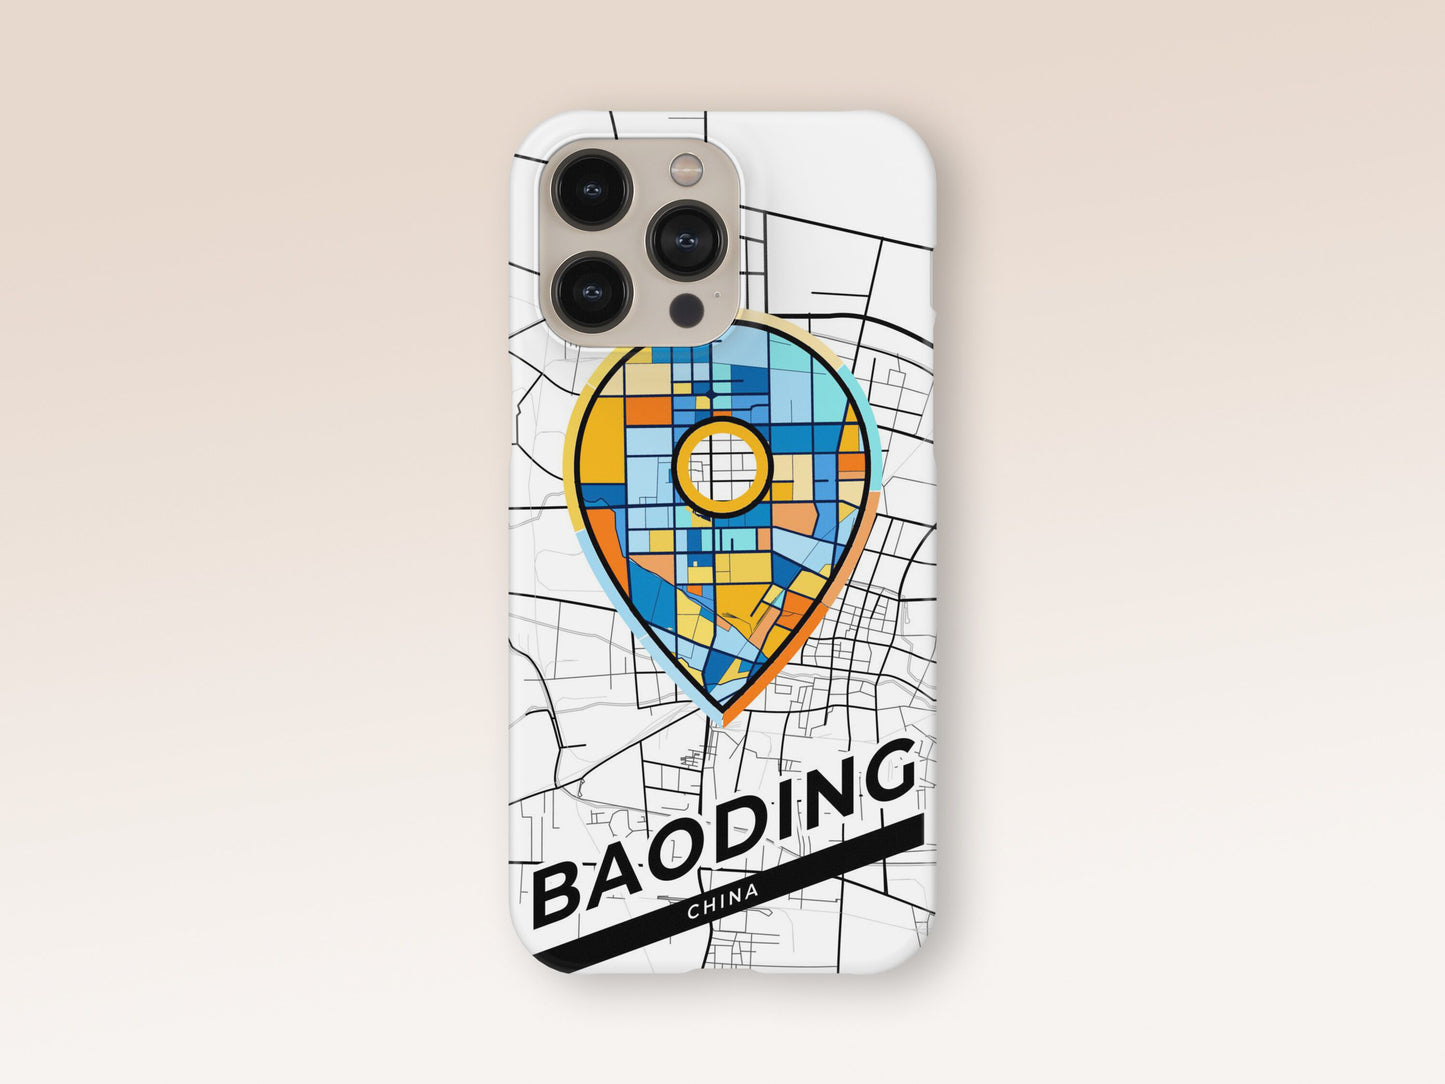 Baoding China slim phone case with colorful icon. Birthday, wedding or housewarming gift. Couple match cases. 1